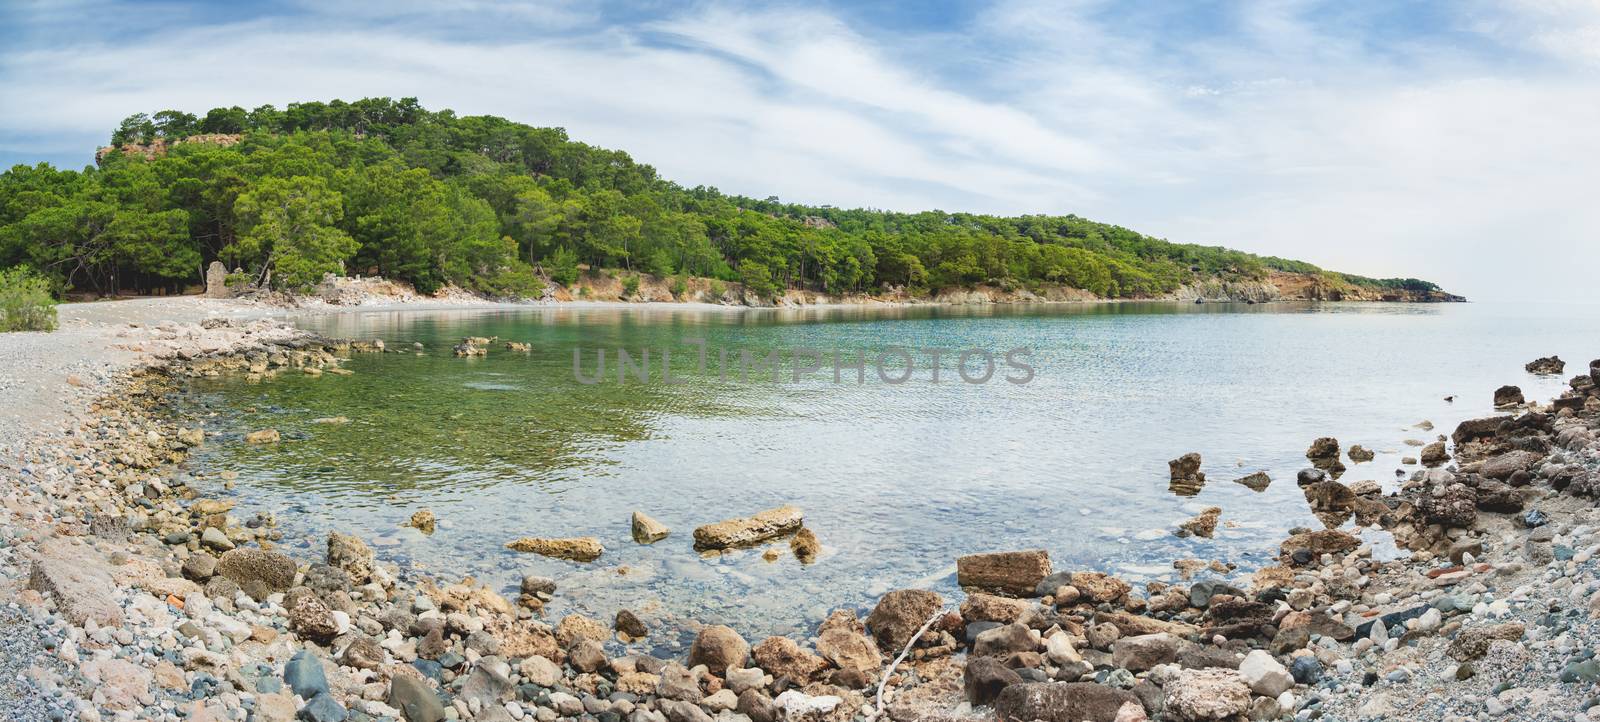 Panorama view of North Harbour of Phaselis. Ruins of Greek city on the coast of ancient Lycia. Architectural landmark near modern town Tekirova in the Kemer district of Antalya Province in Turkey. by aksenovko